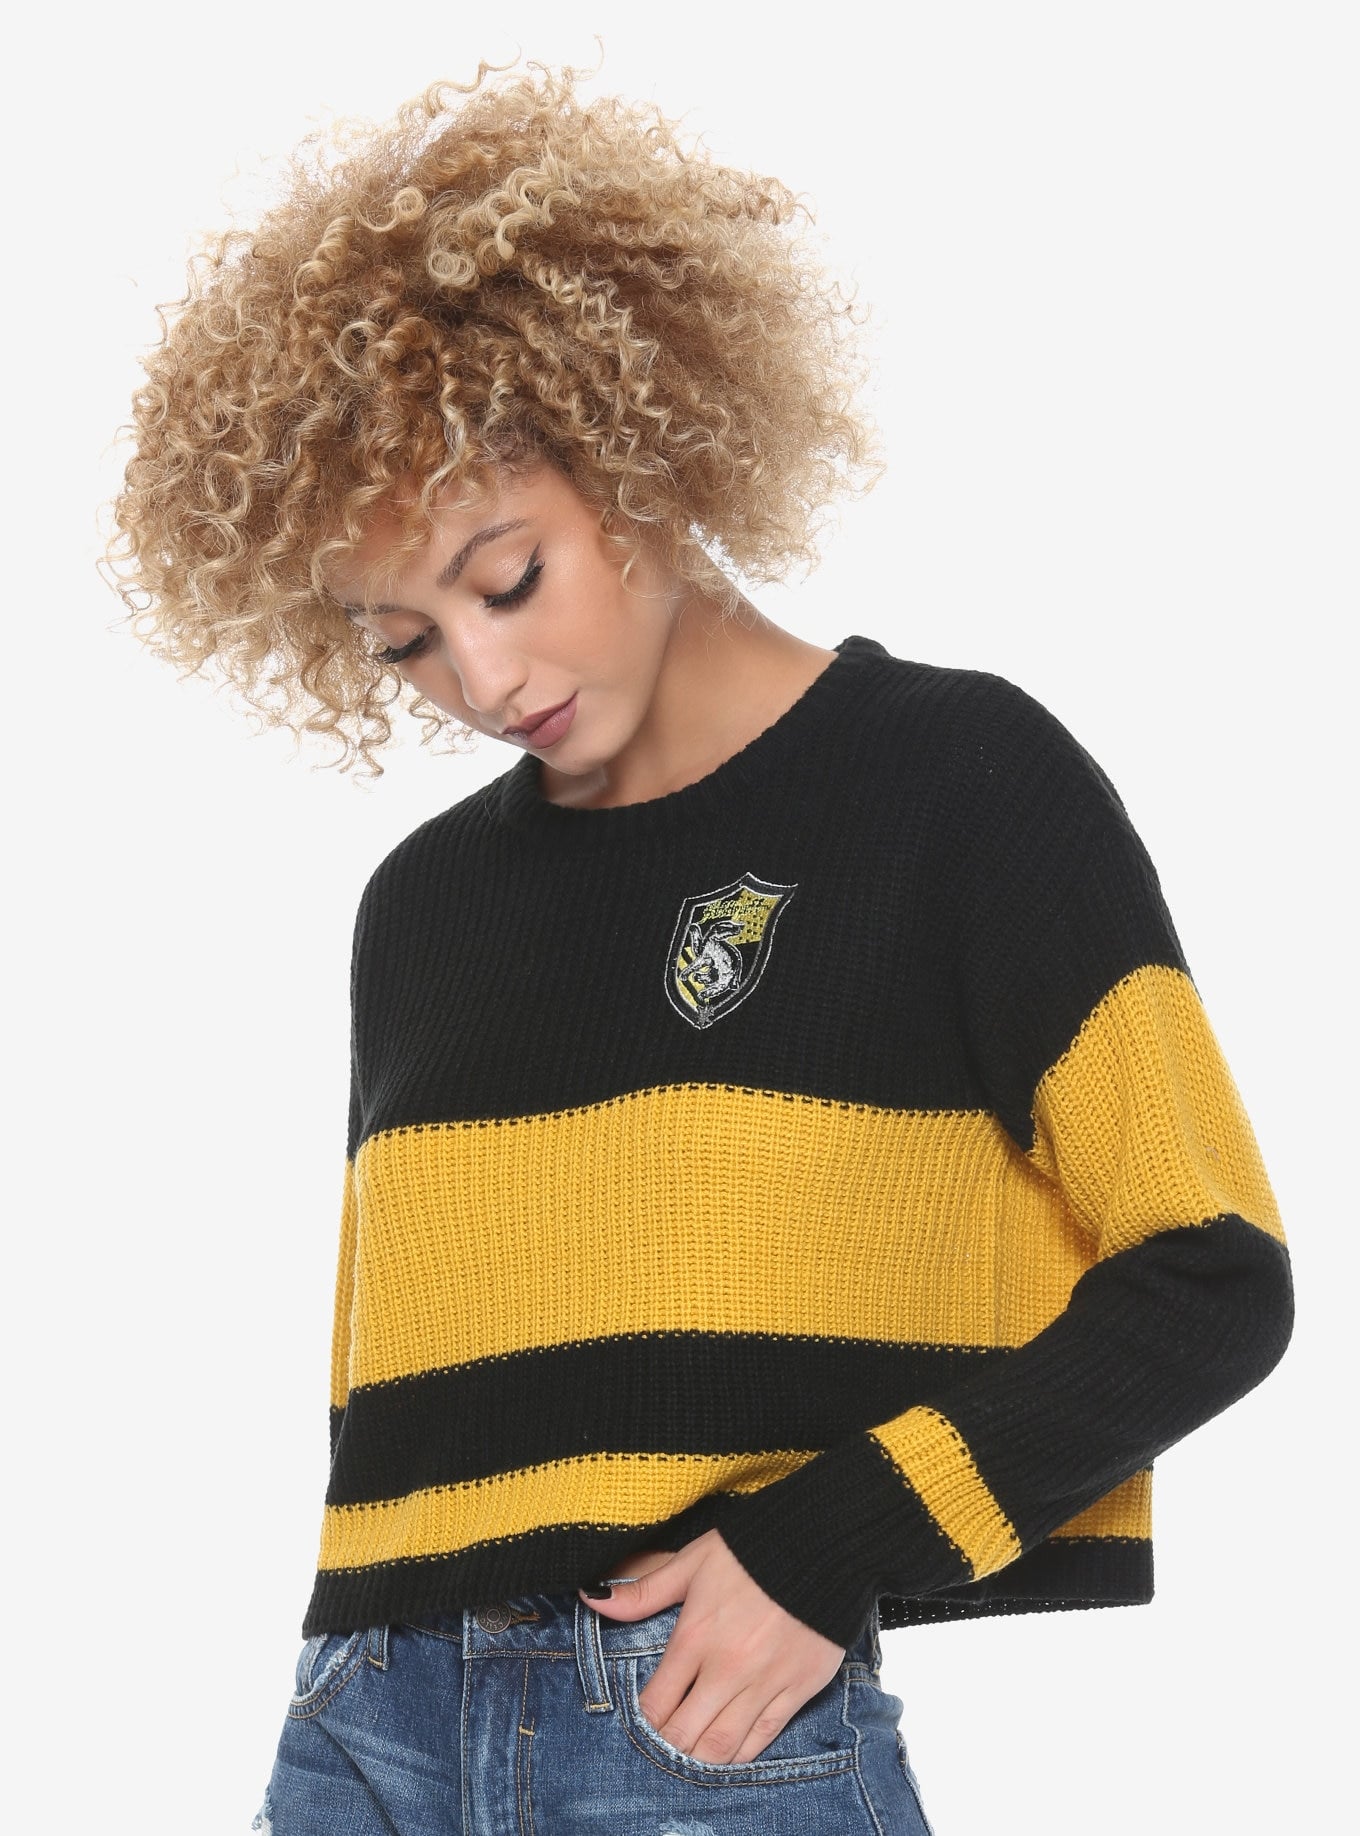 Trillen Geboorteplaats Artistiek Harry Potter Hufflepuff Quidditch Sweater | Accio Credit Card! These Harry  Potter Gifts Are Worth All Our Galleons | POPSUGAR Entertainment Photo 68